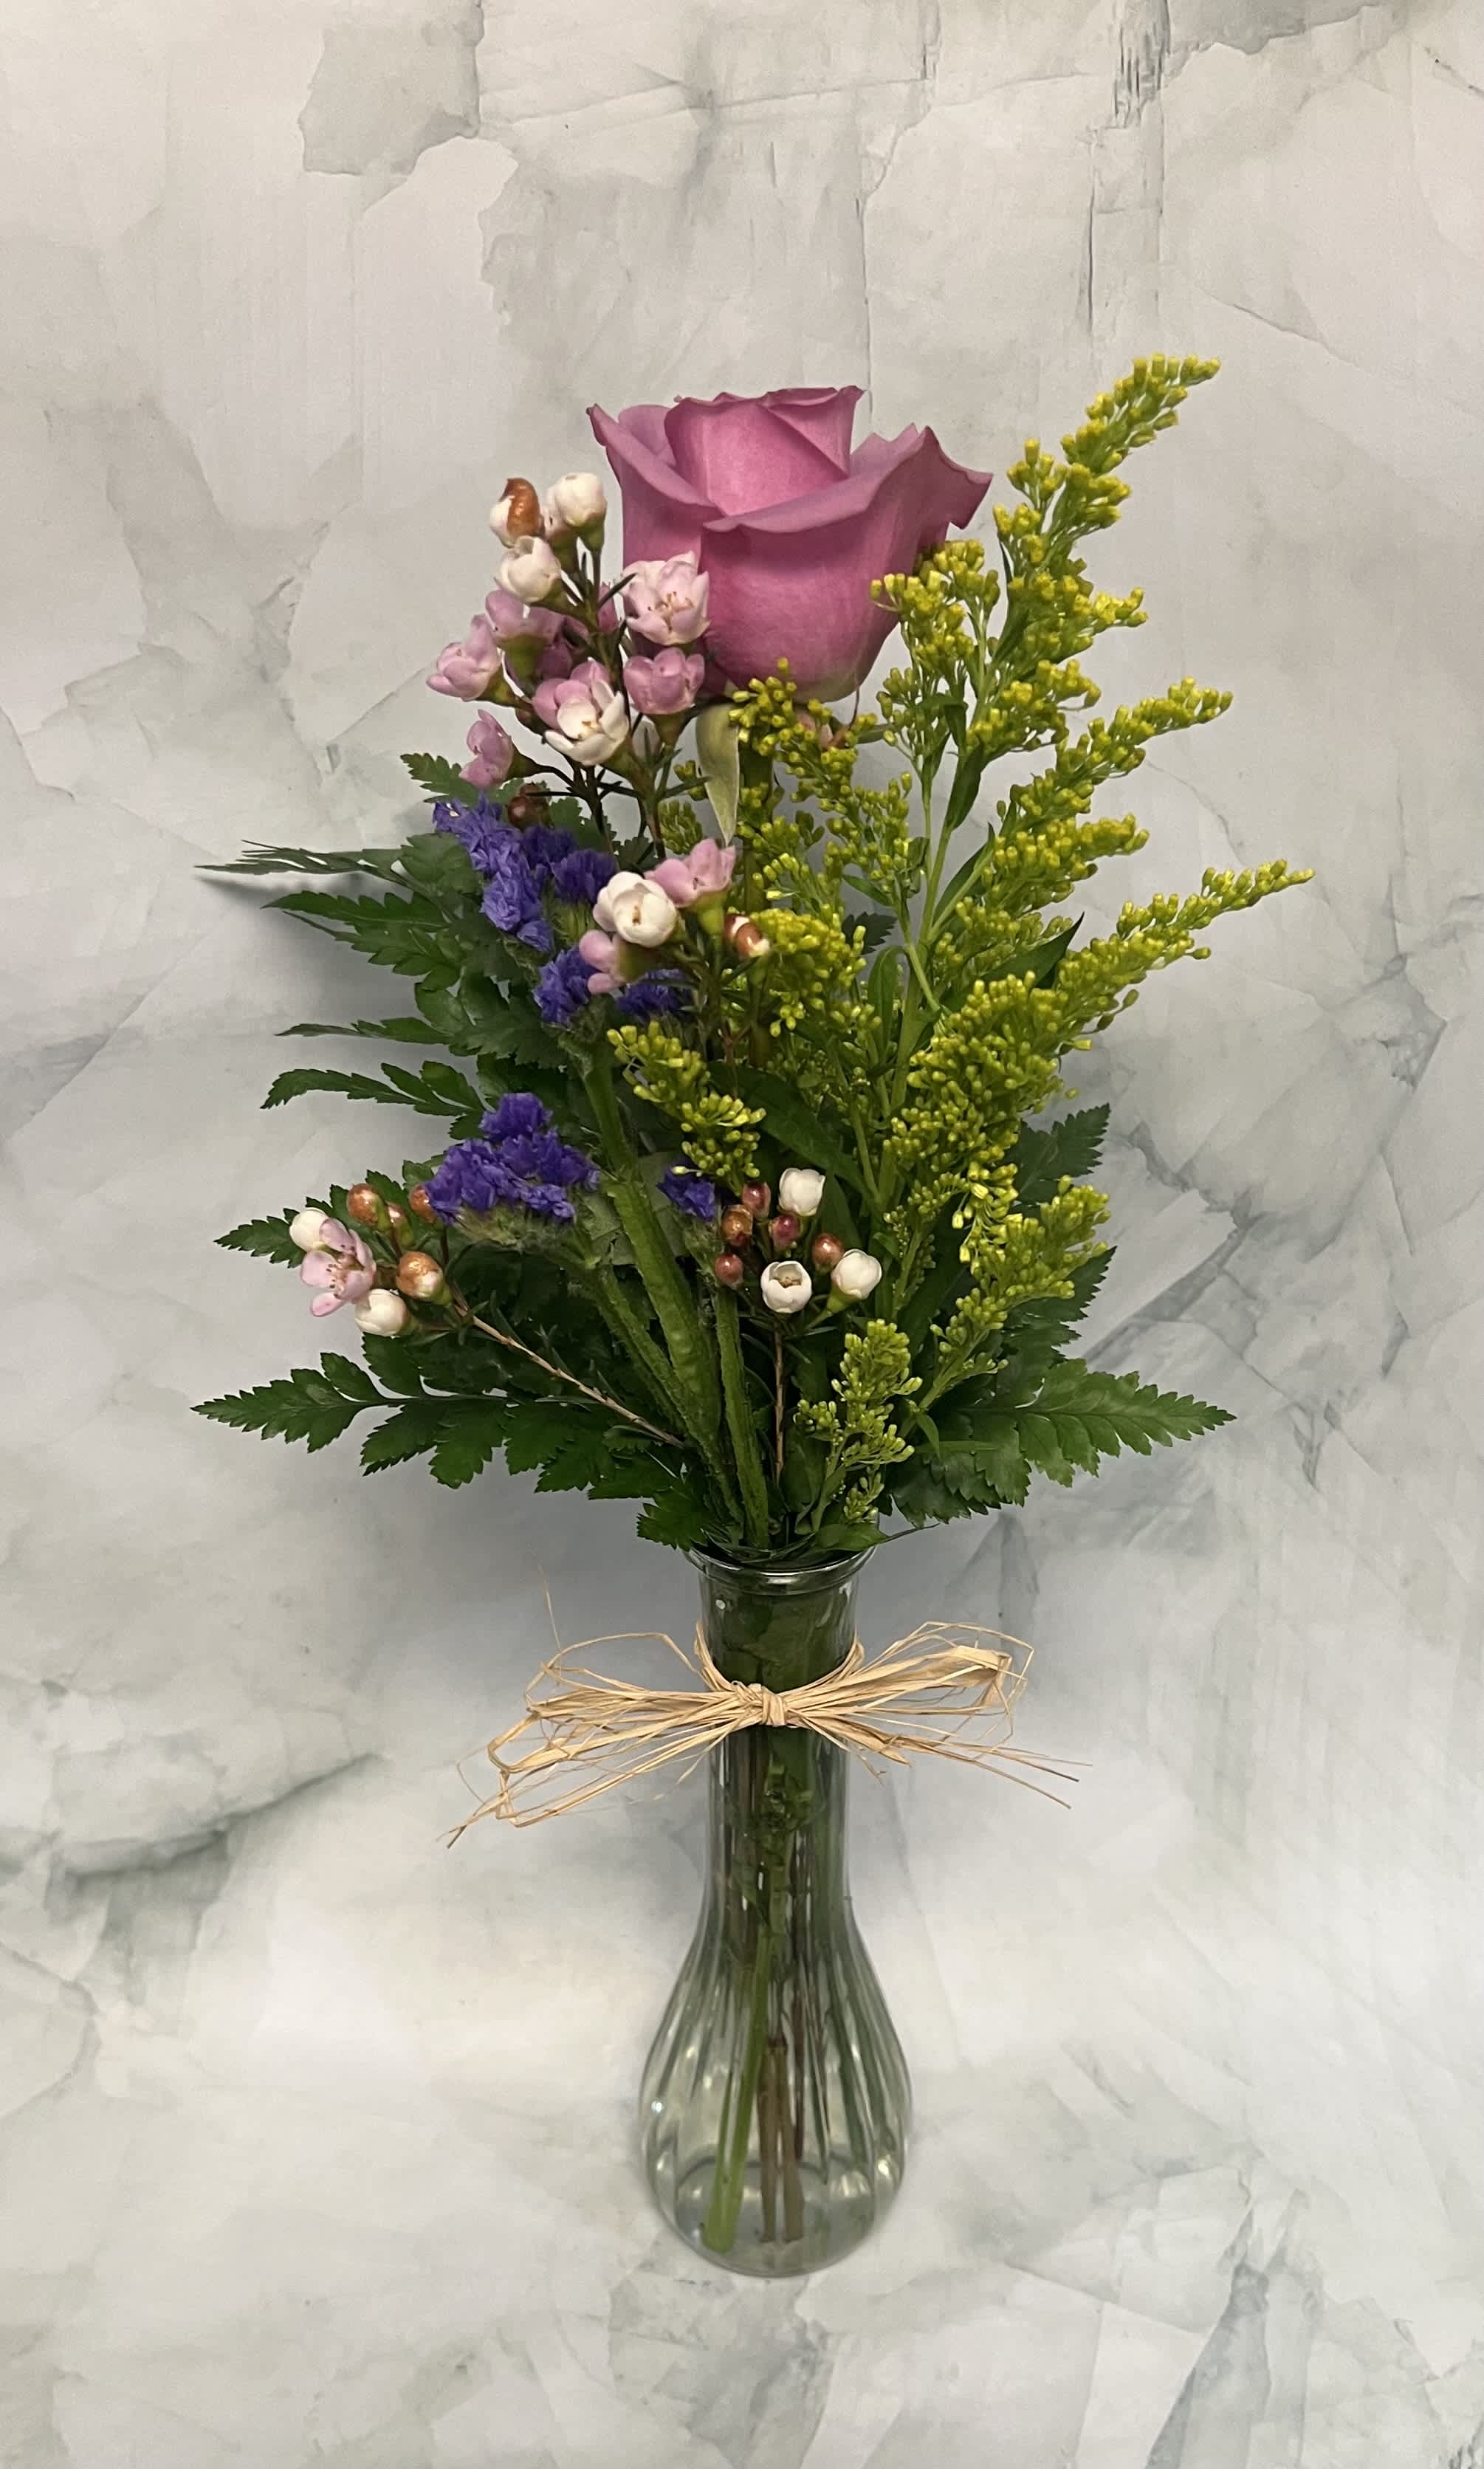 Buds of Beauty - This beautiful arrangement is so simple yet full of beauty. This includes a single Rose, Aster, Wax, and a sprig of Statice. 